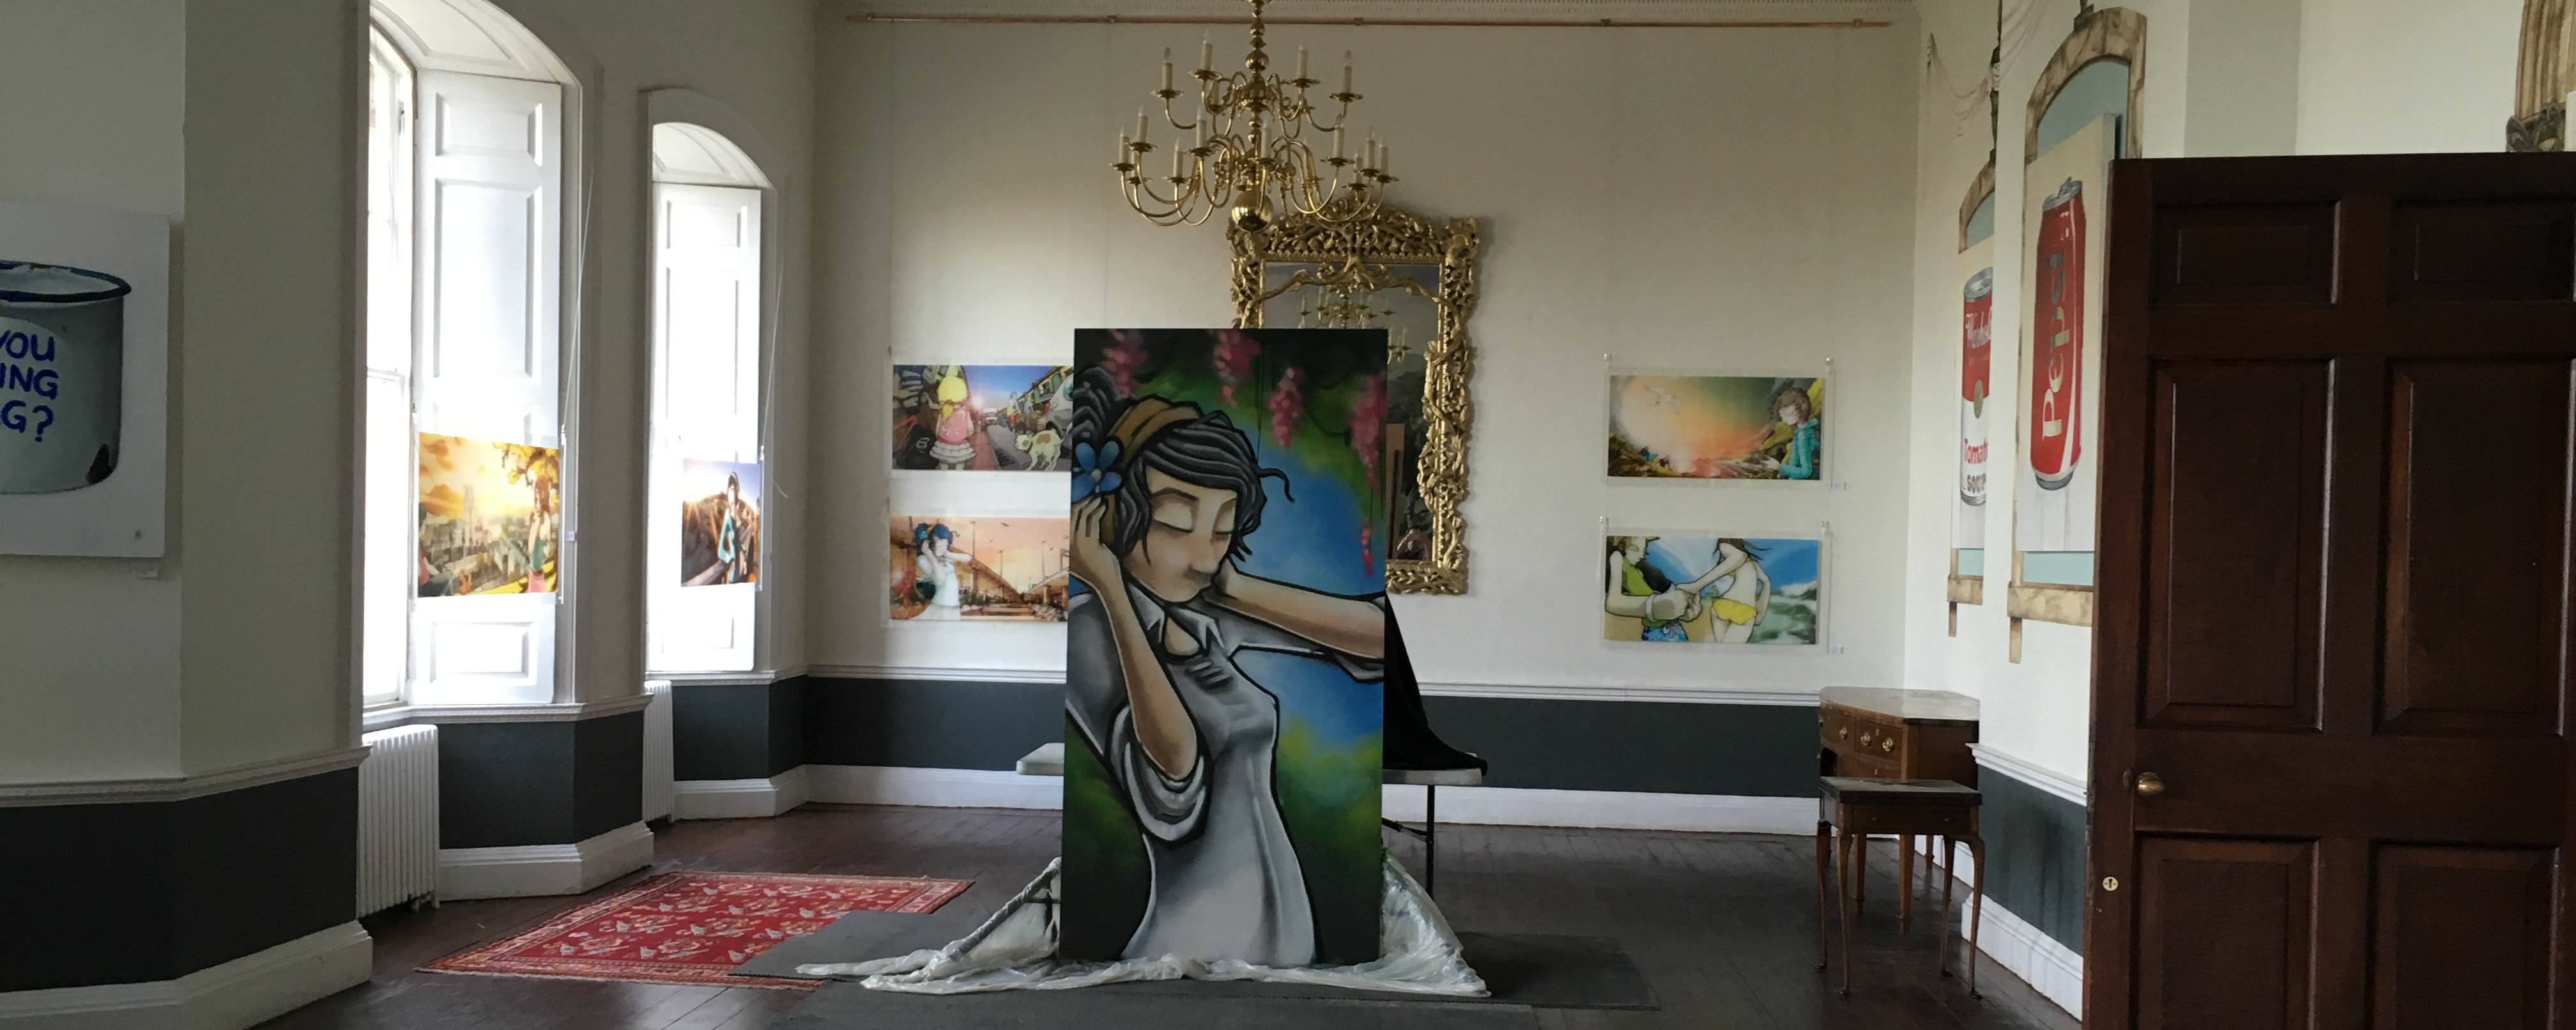 An art exhibition in the Vanbrugh Room at Kings Weston House